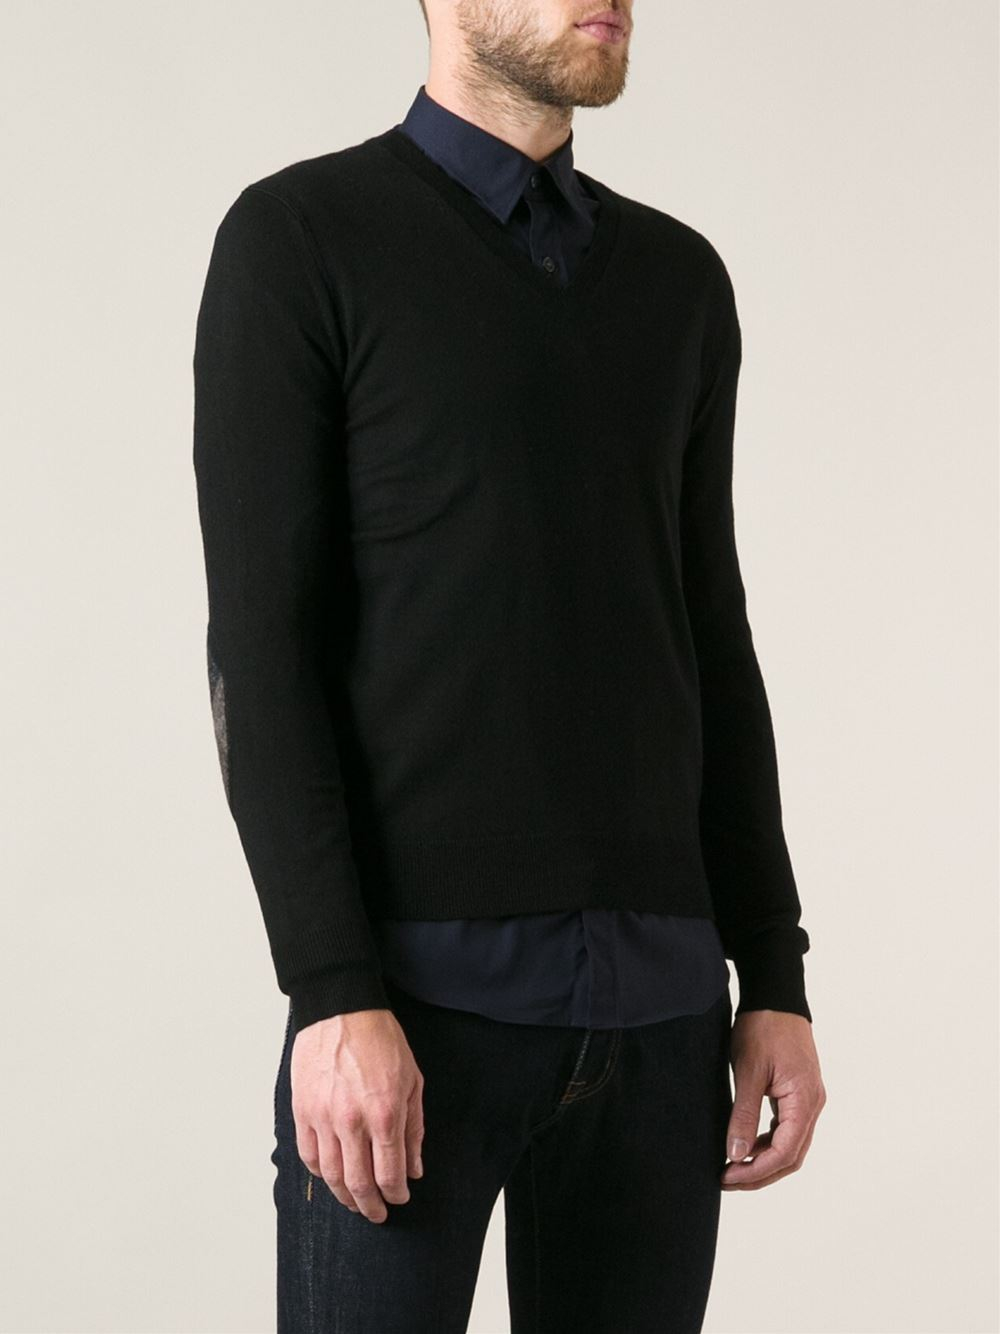 Burberry mens sweater with elbow patches pictures marks and